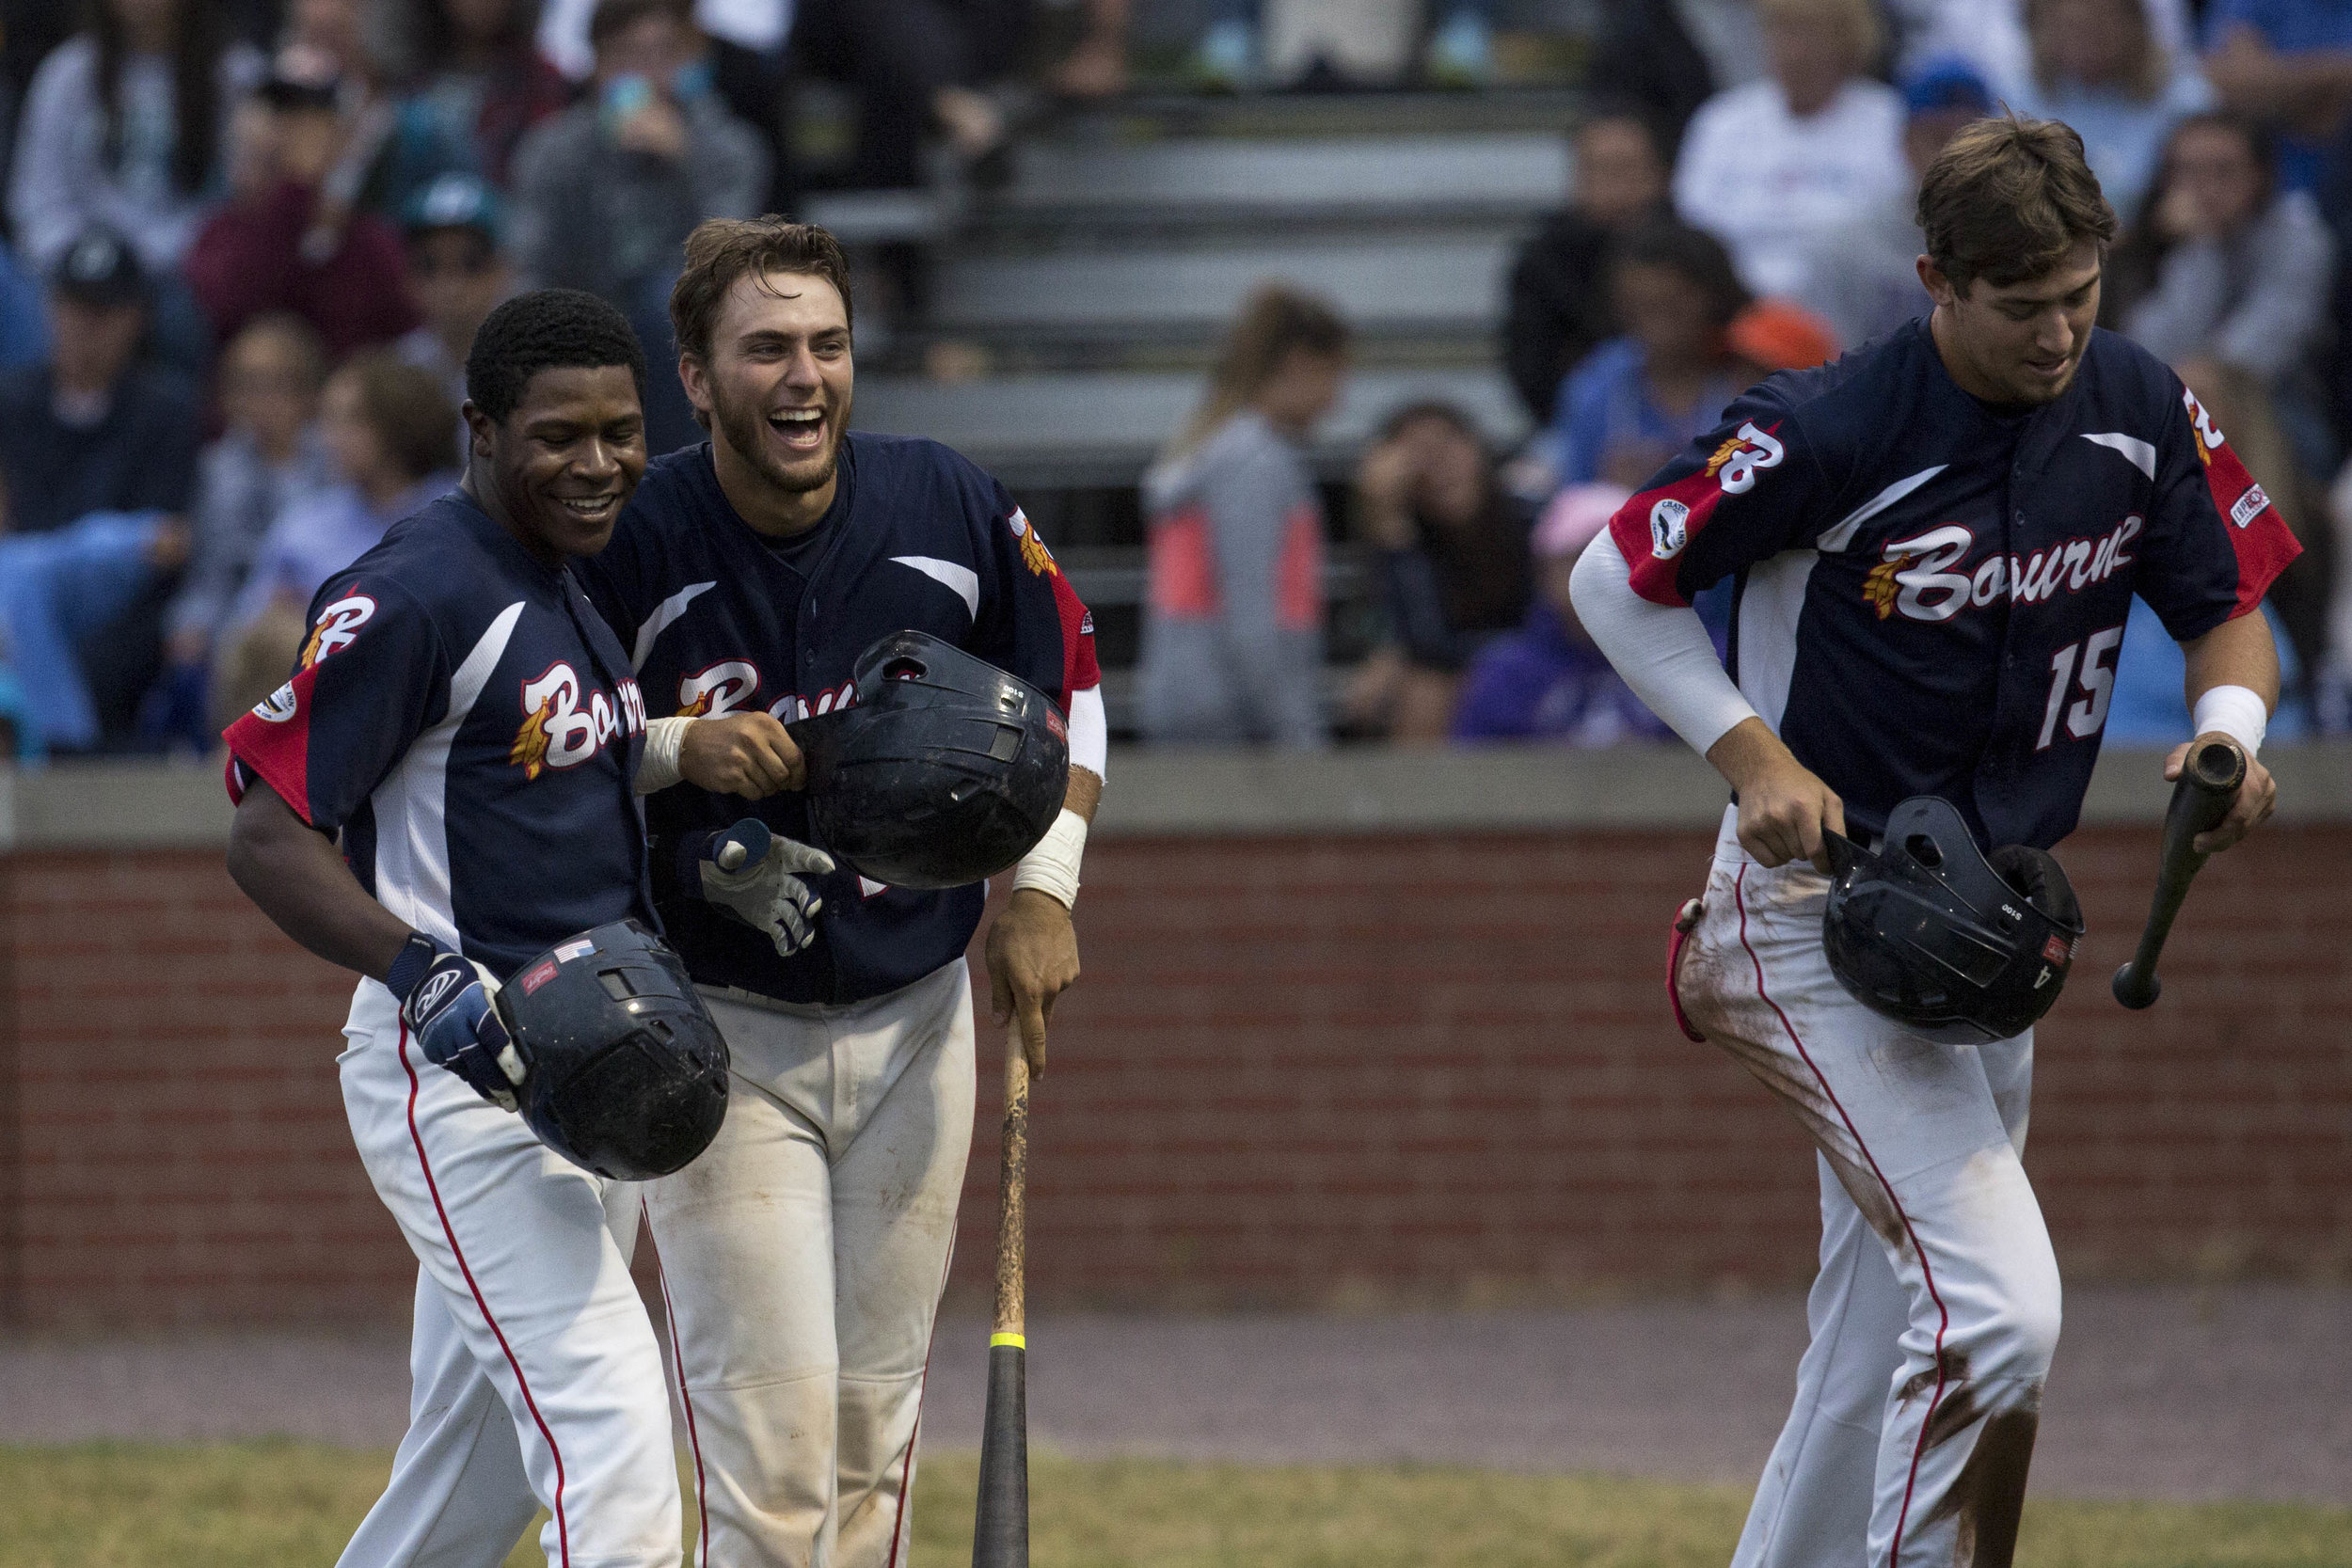  Bourne Braves Jameson Hannah celebrates hitting a home run with his teammates during game two of the Cape League Championships against the Bourne Braves on August 12, 2017. 